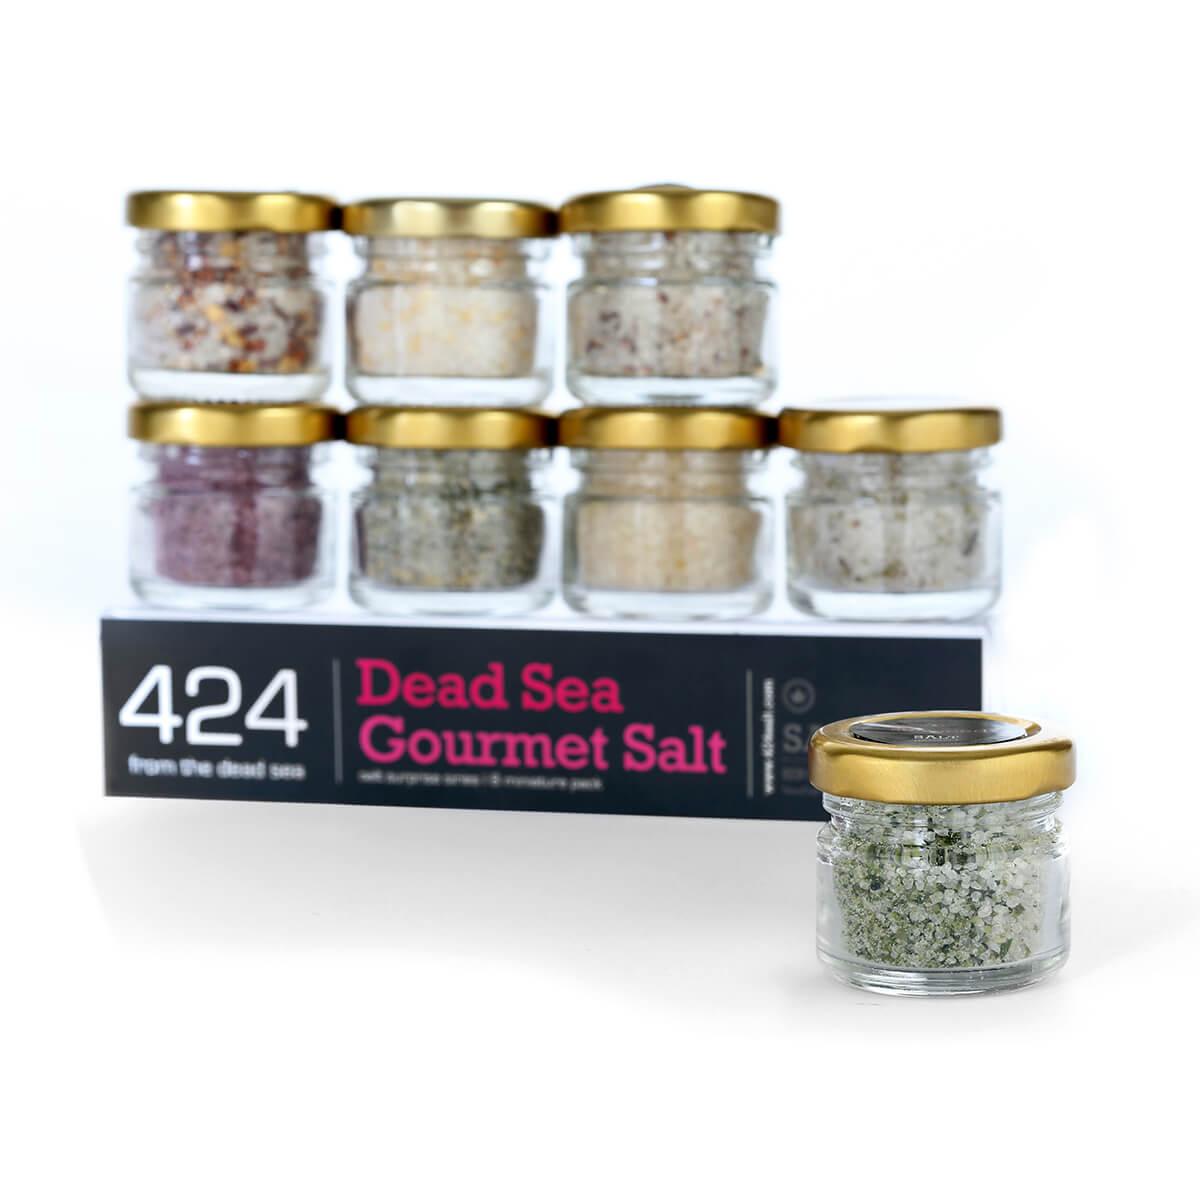 8 Miniature Multi Chef Gift Pack Salts From The Dead Sea 21.3oz / 605 grams - Spring Nahal